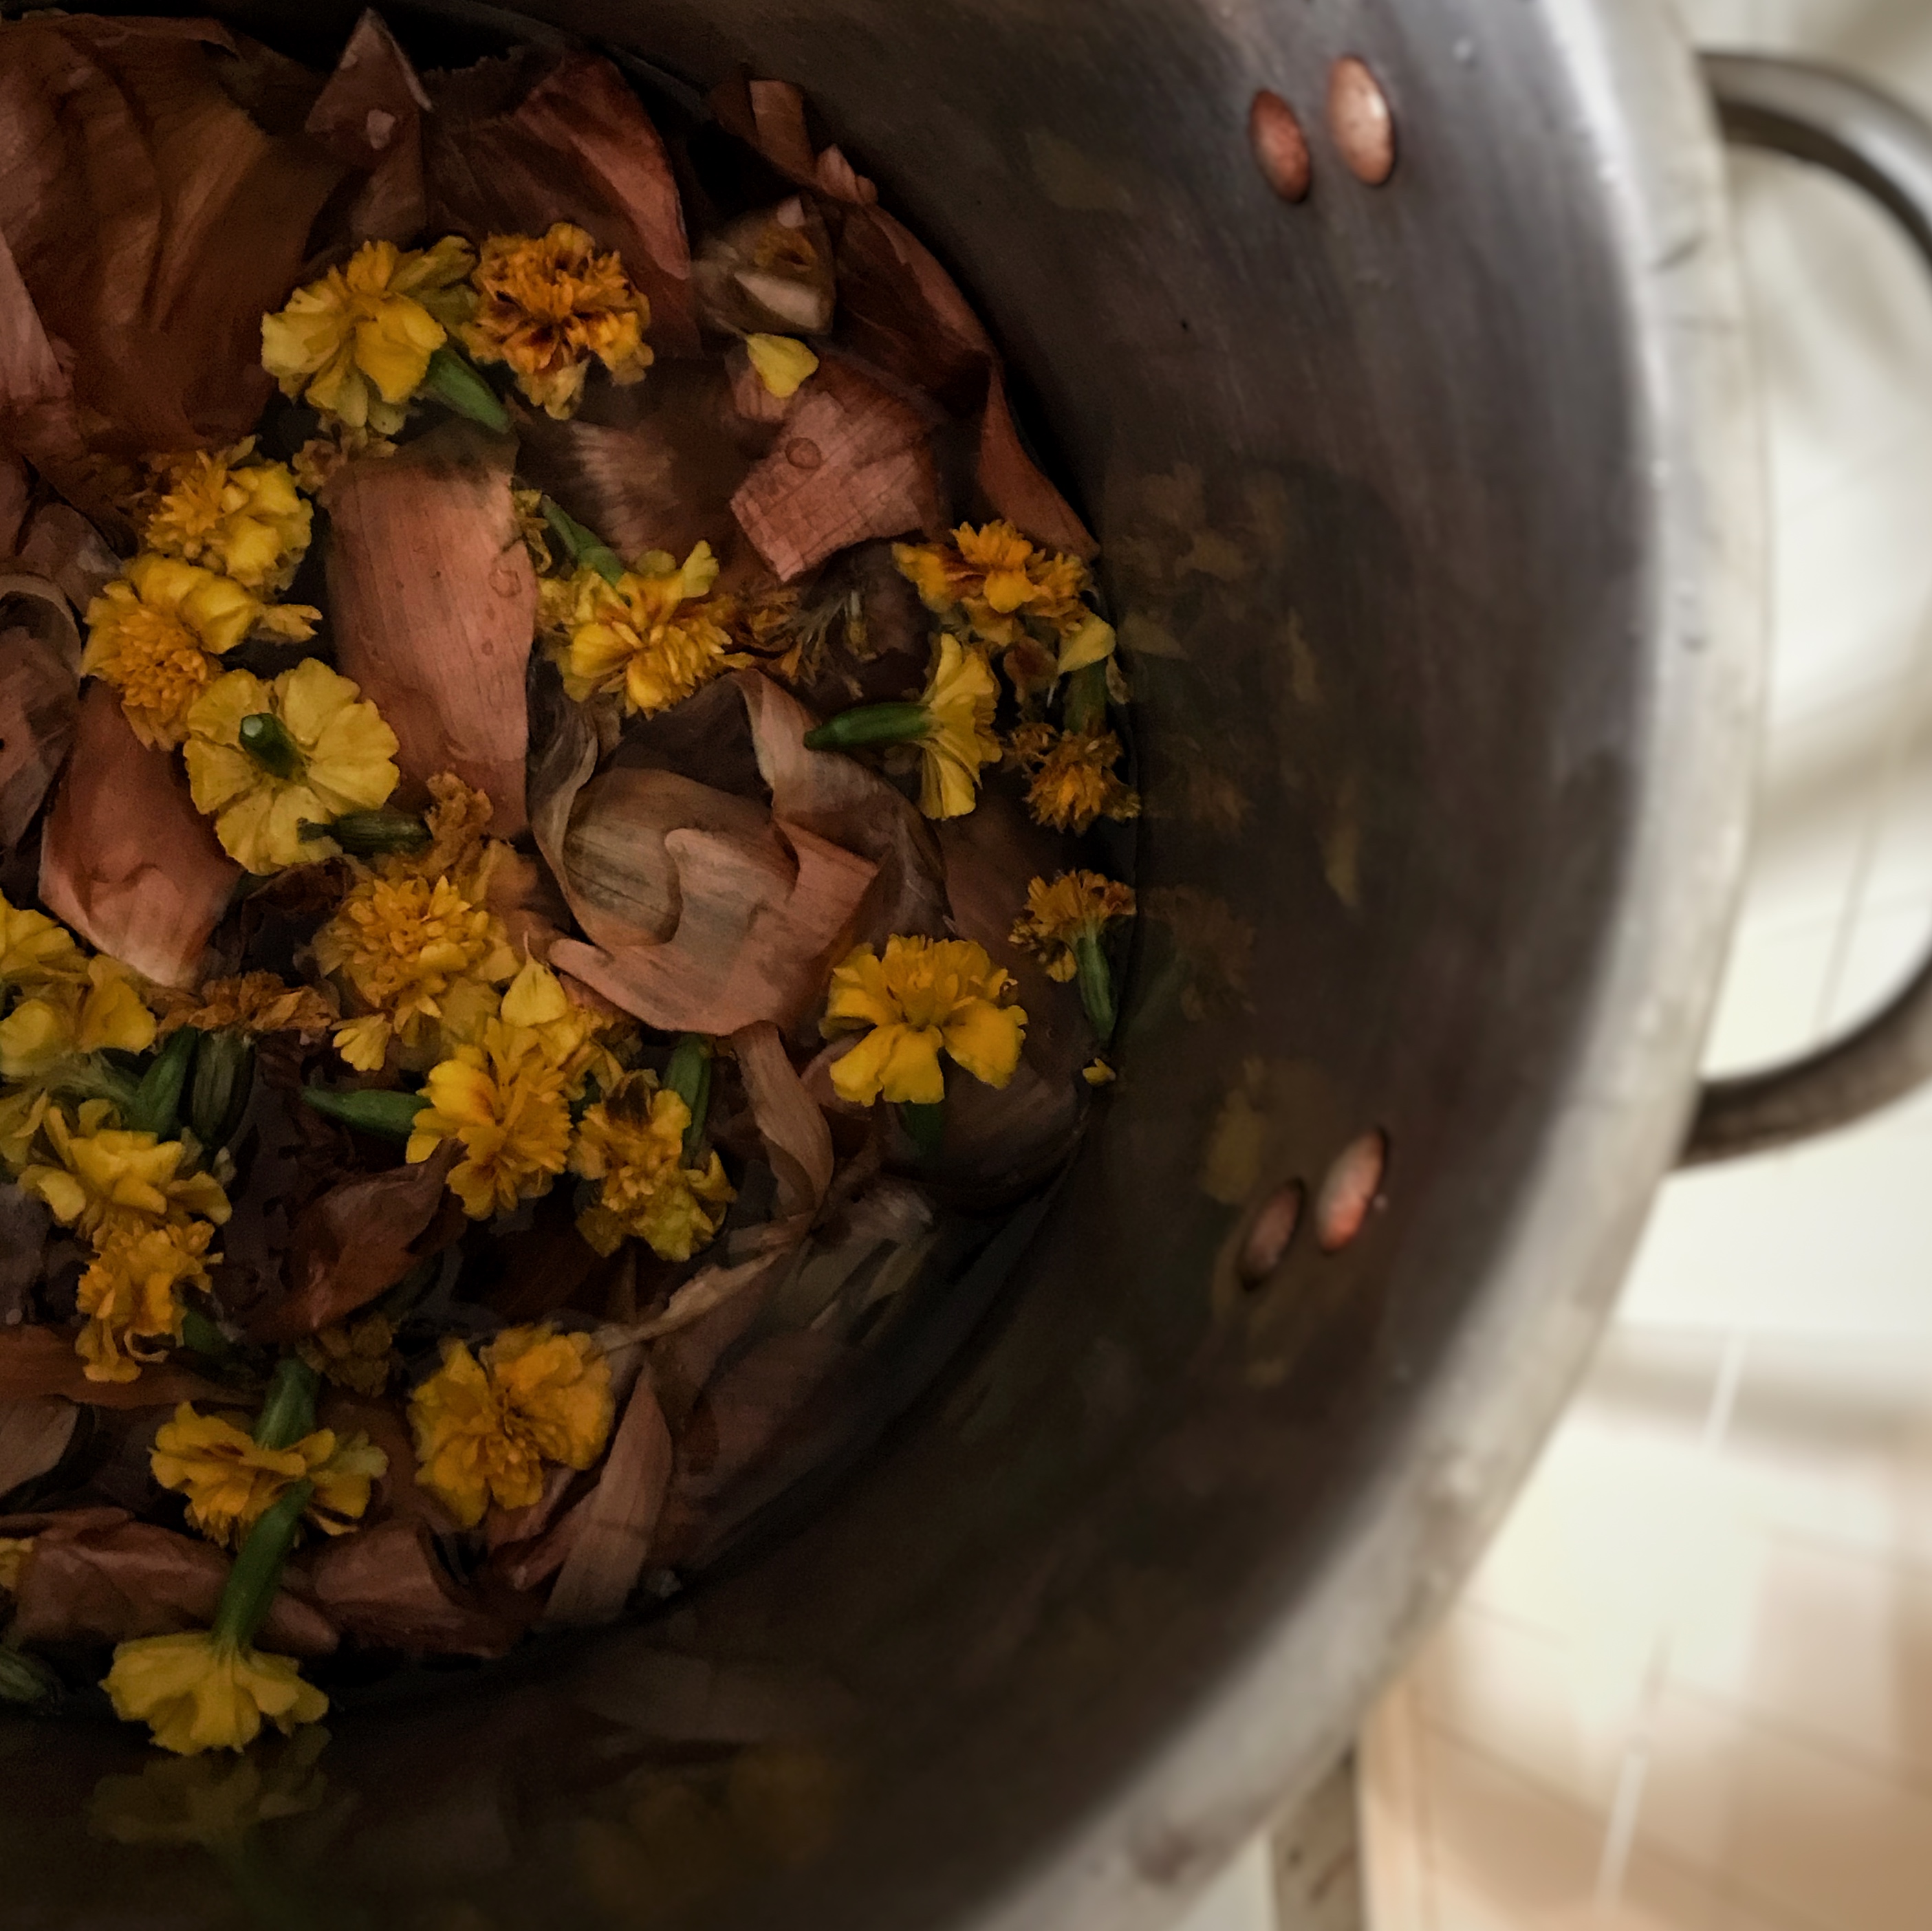 dye pot full of yellow marigold flowers and onion skins